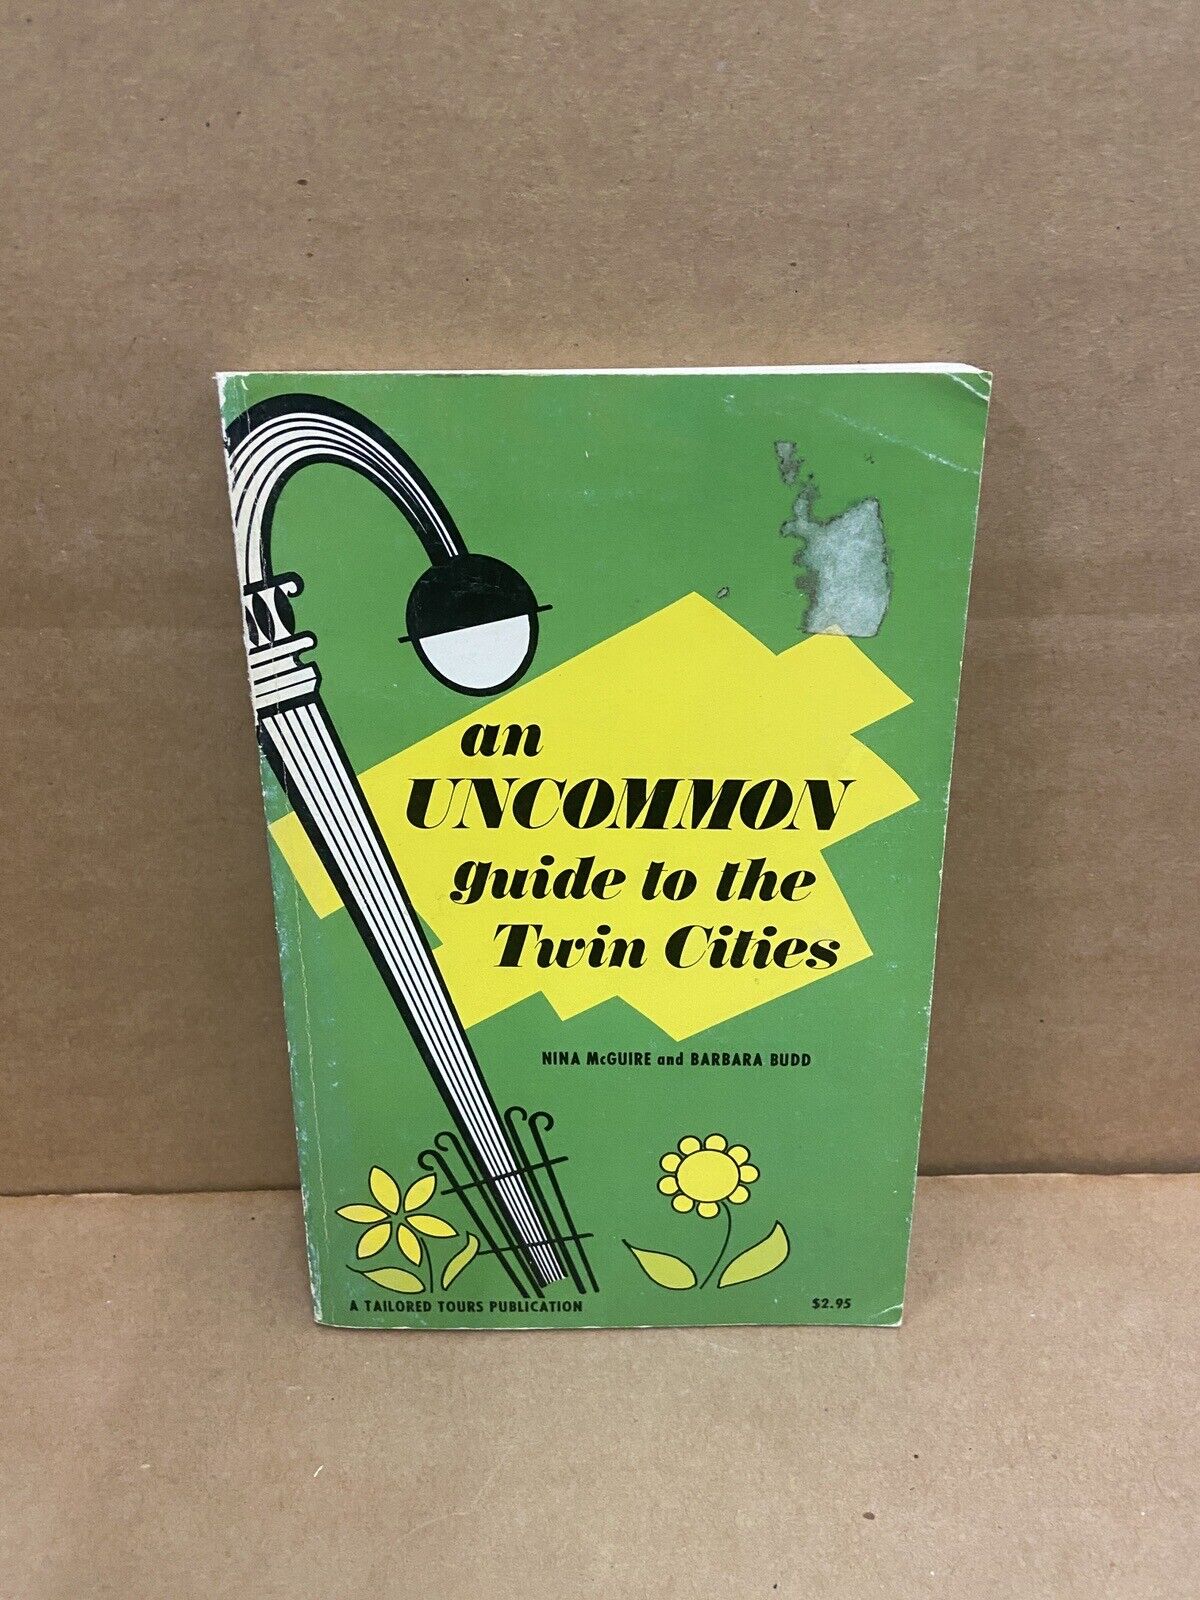 an UNCOMMON guide to the Twin Cities Nina McGuire and Barbara Budd 1970